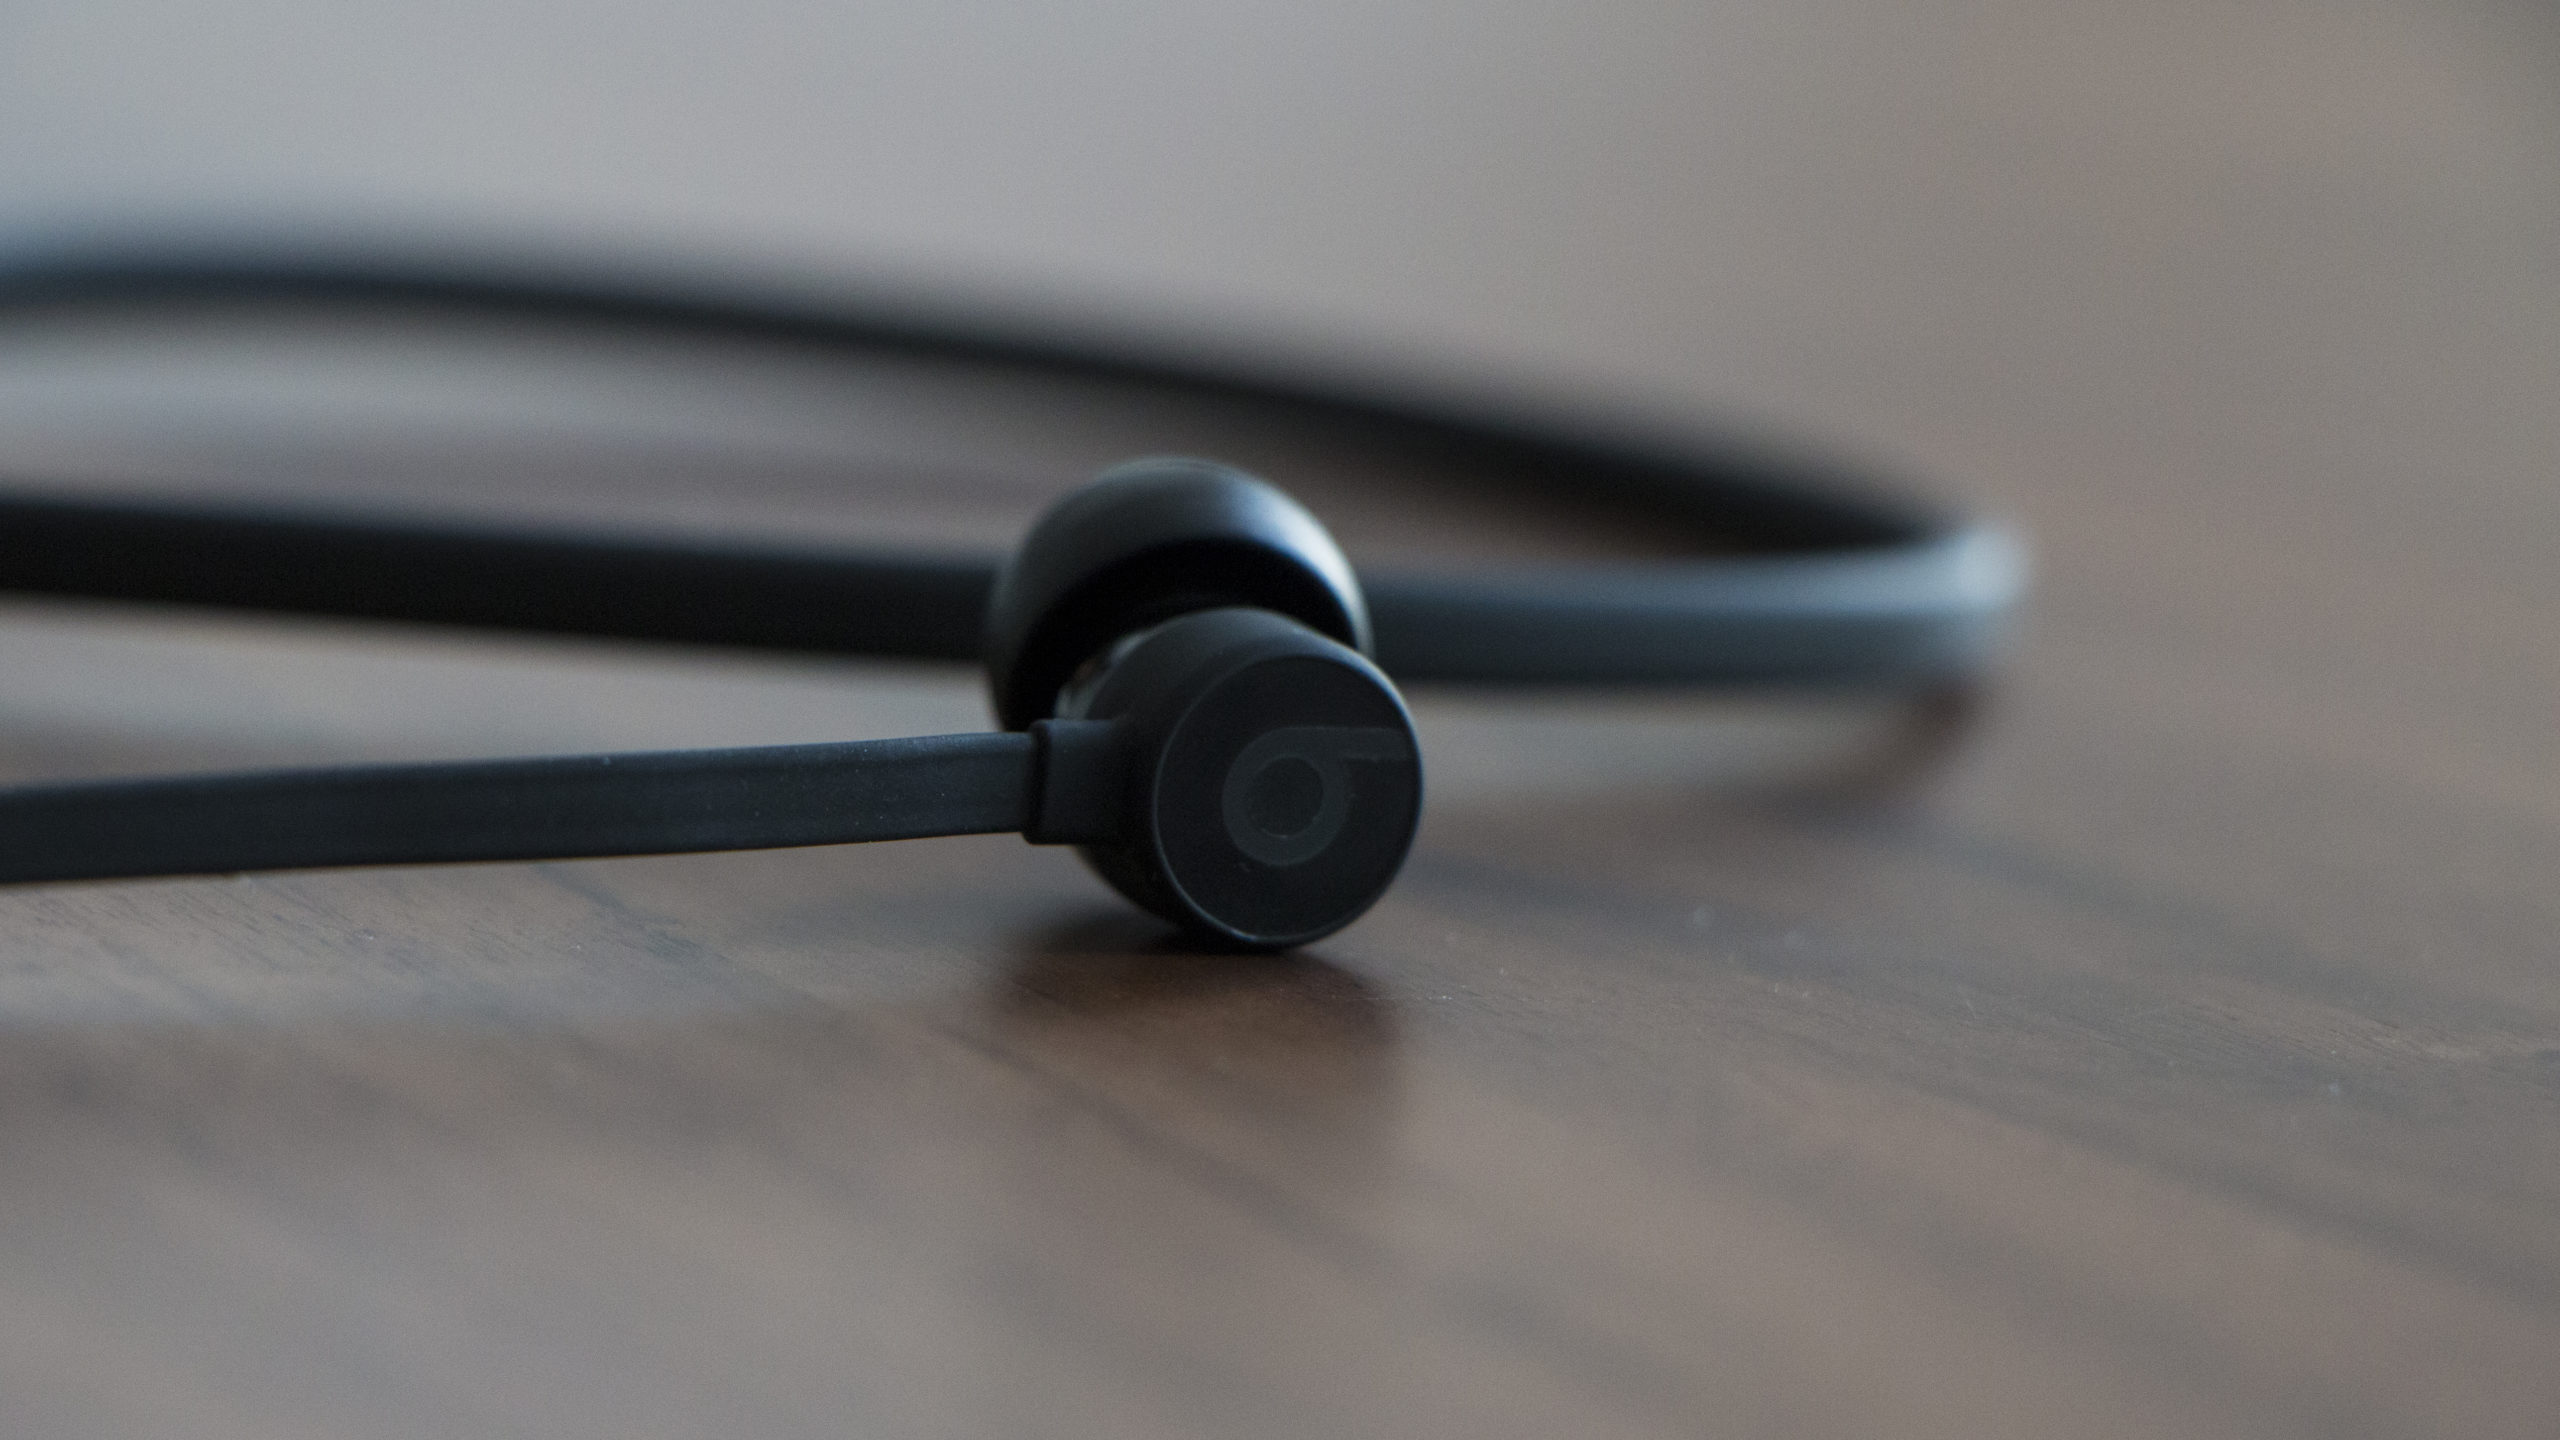 These Are The Very Best Wireless Earbuds You Can Buy